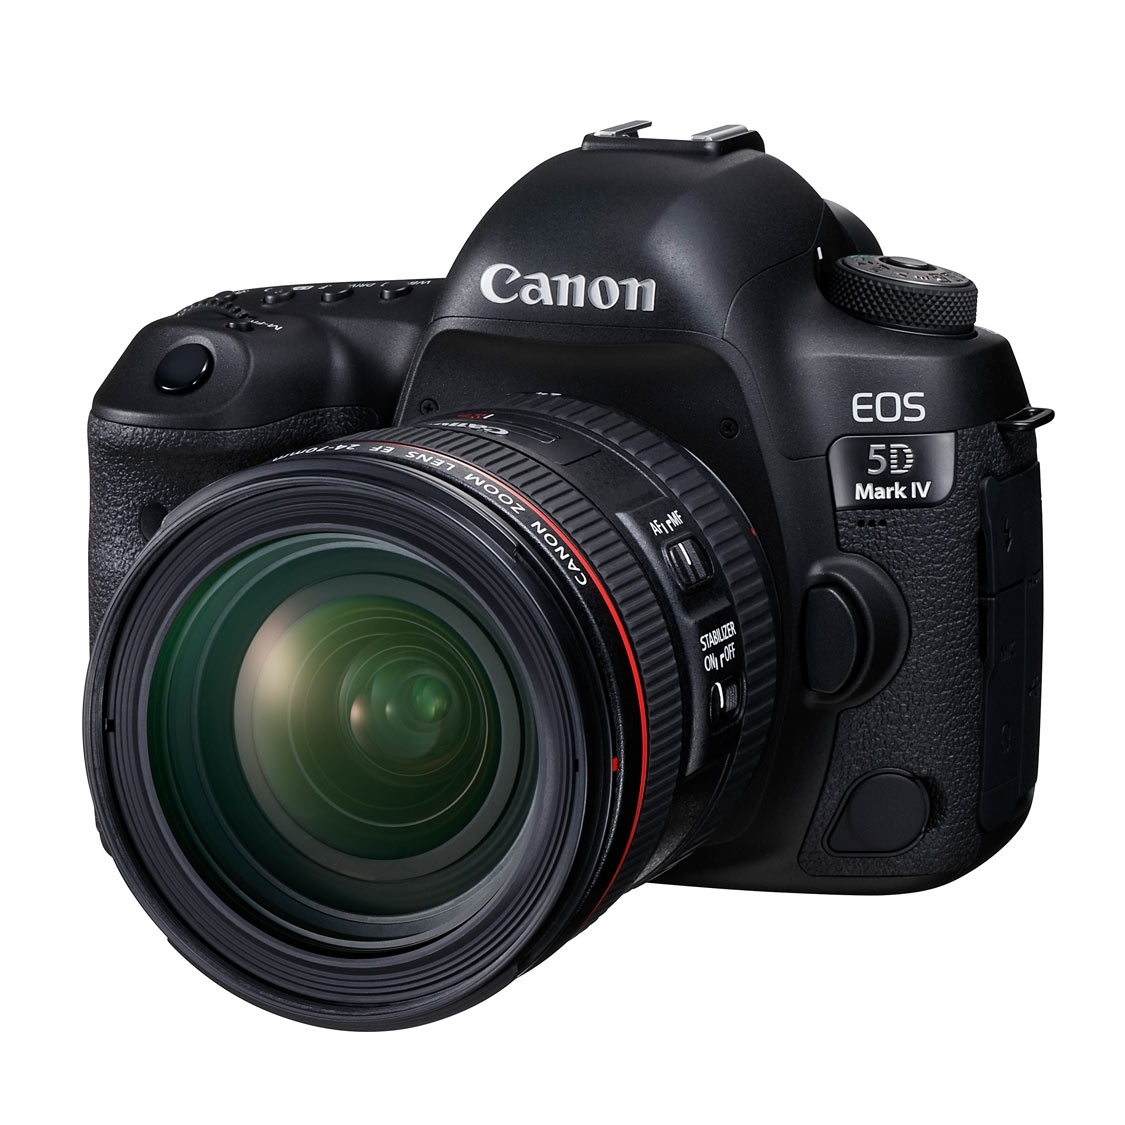 Canon EOS 5D Mark IV DSLR with 24-70mm f4.0L IS Lens - Open Box